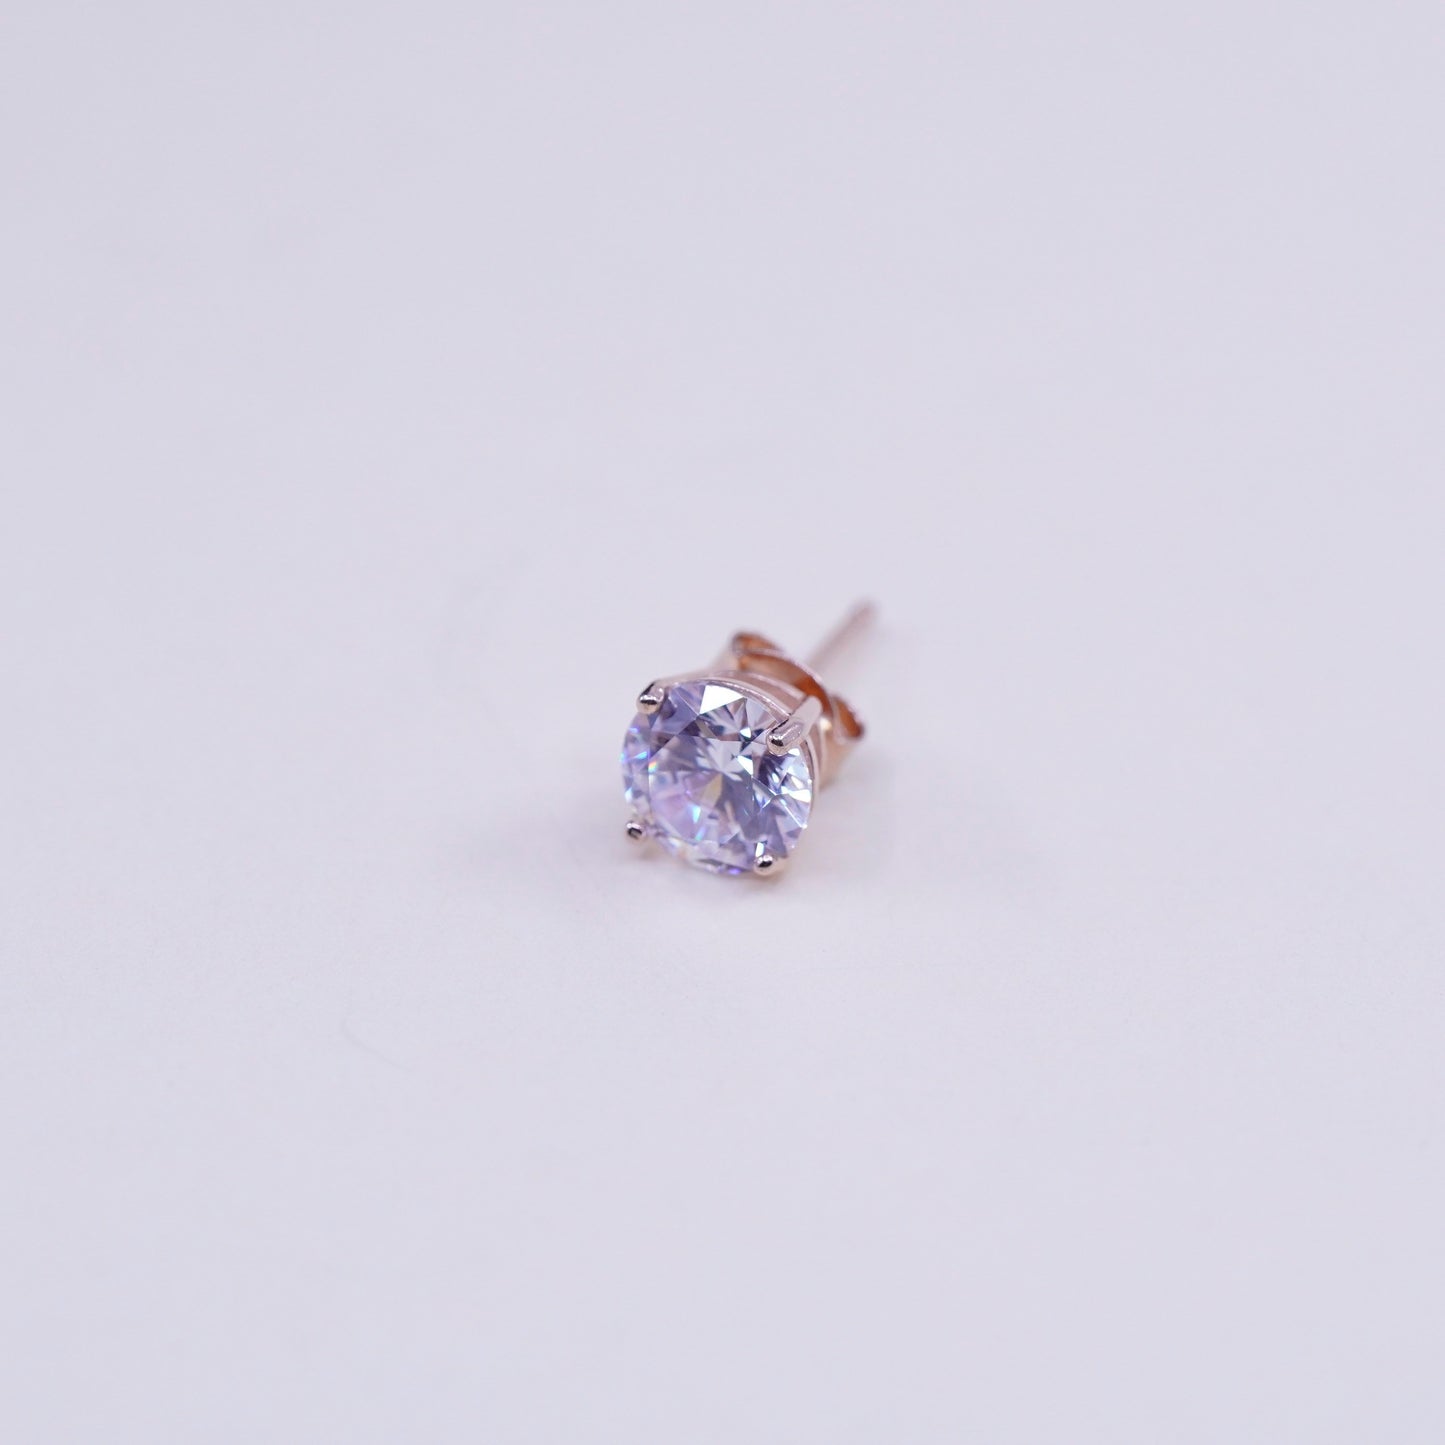 5mm, Vintage rose gold over sterling 925 silver cz studs, minimalist earrings